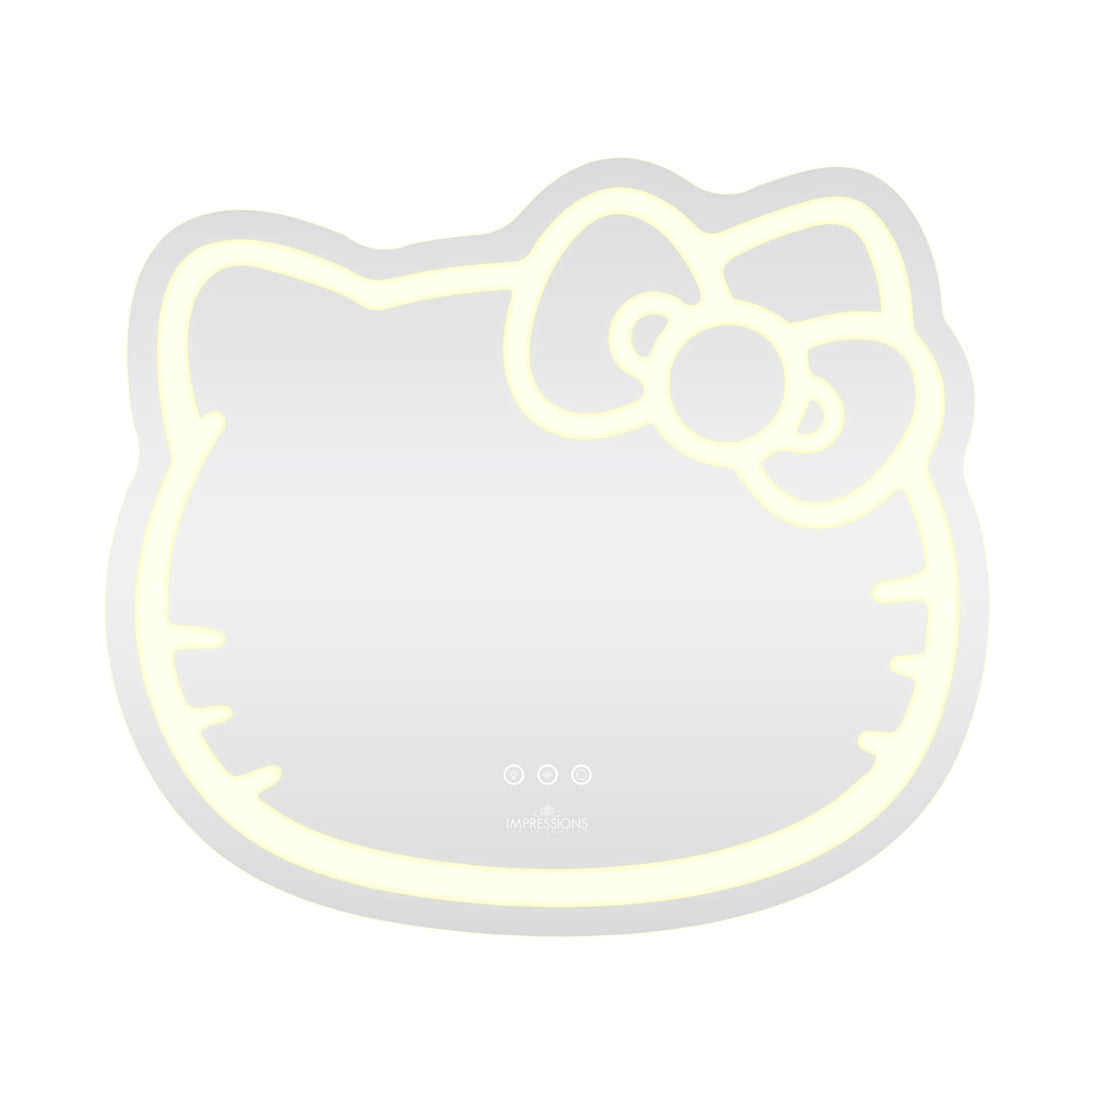 SANRIO Hello Kitty Ambient Table Light - RED